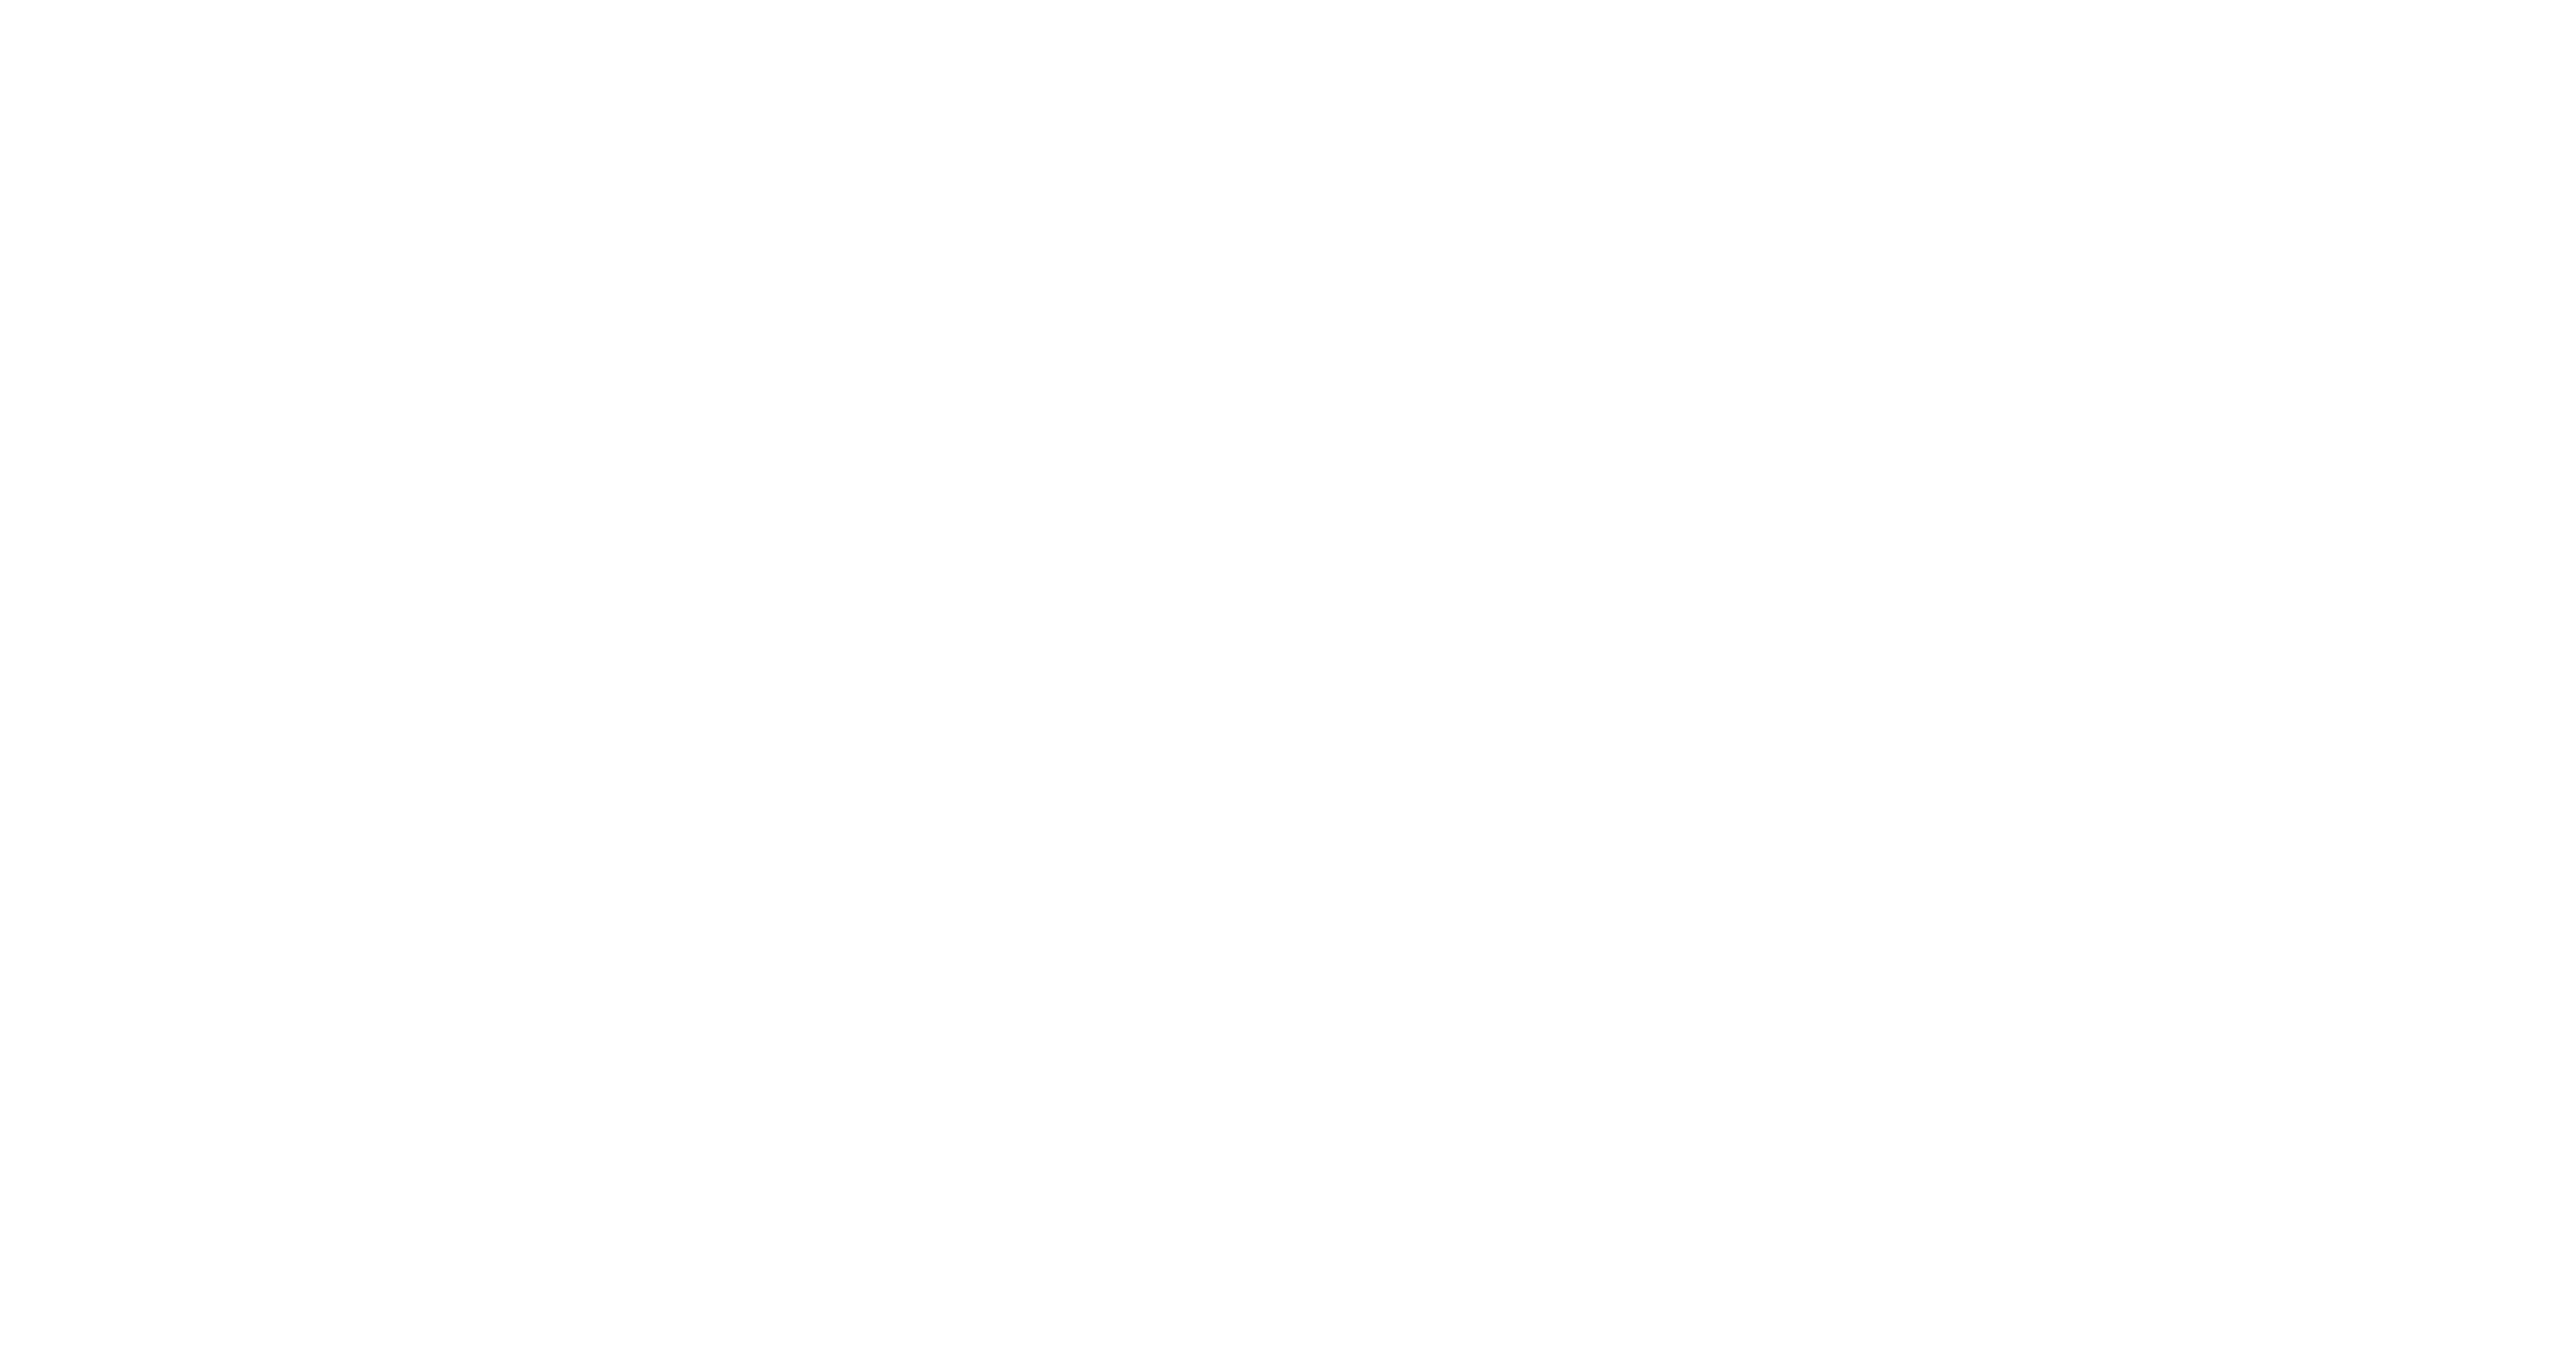 Wilkes University logo - vertical with white text